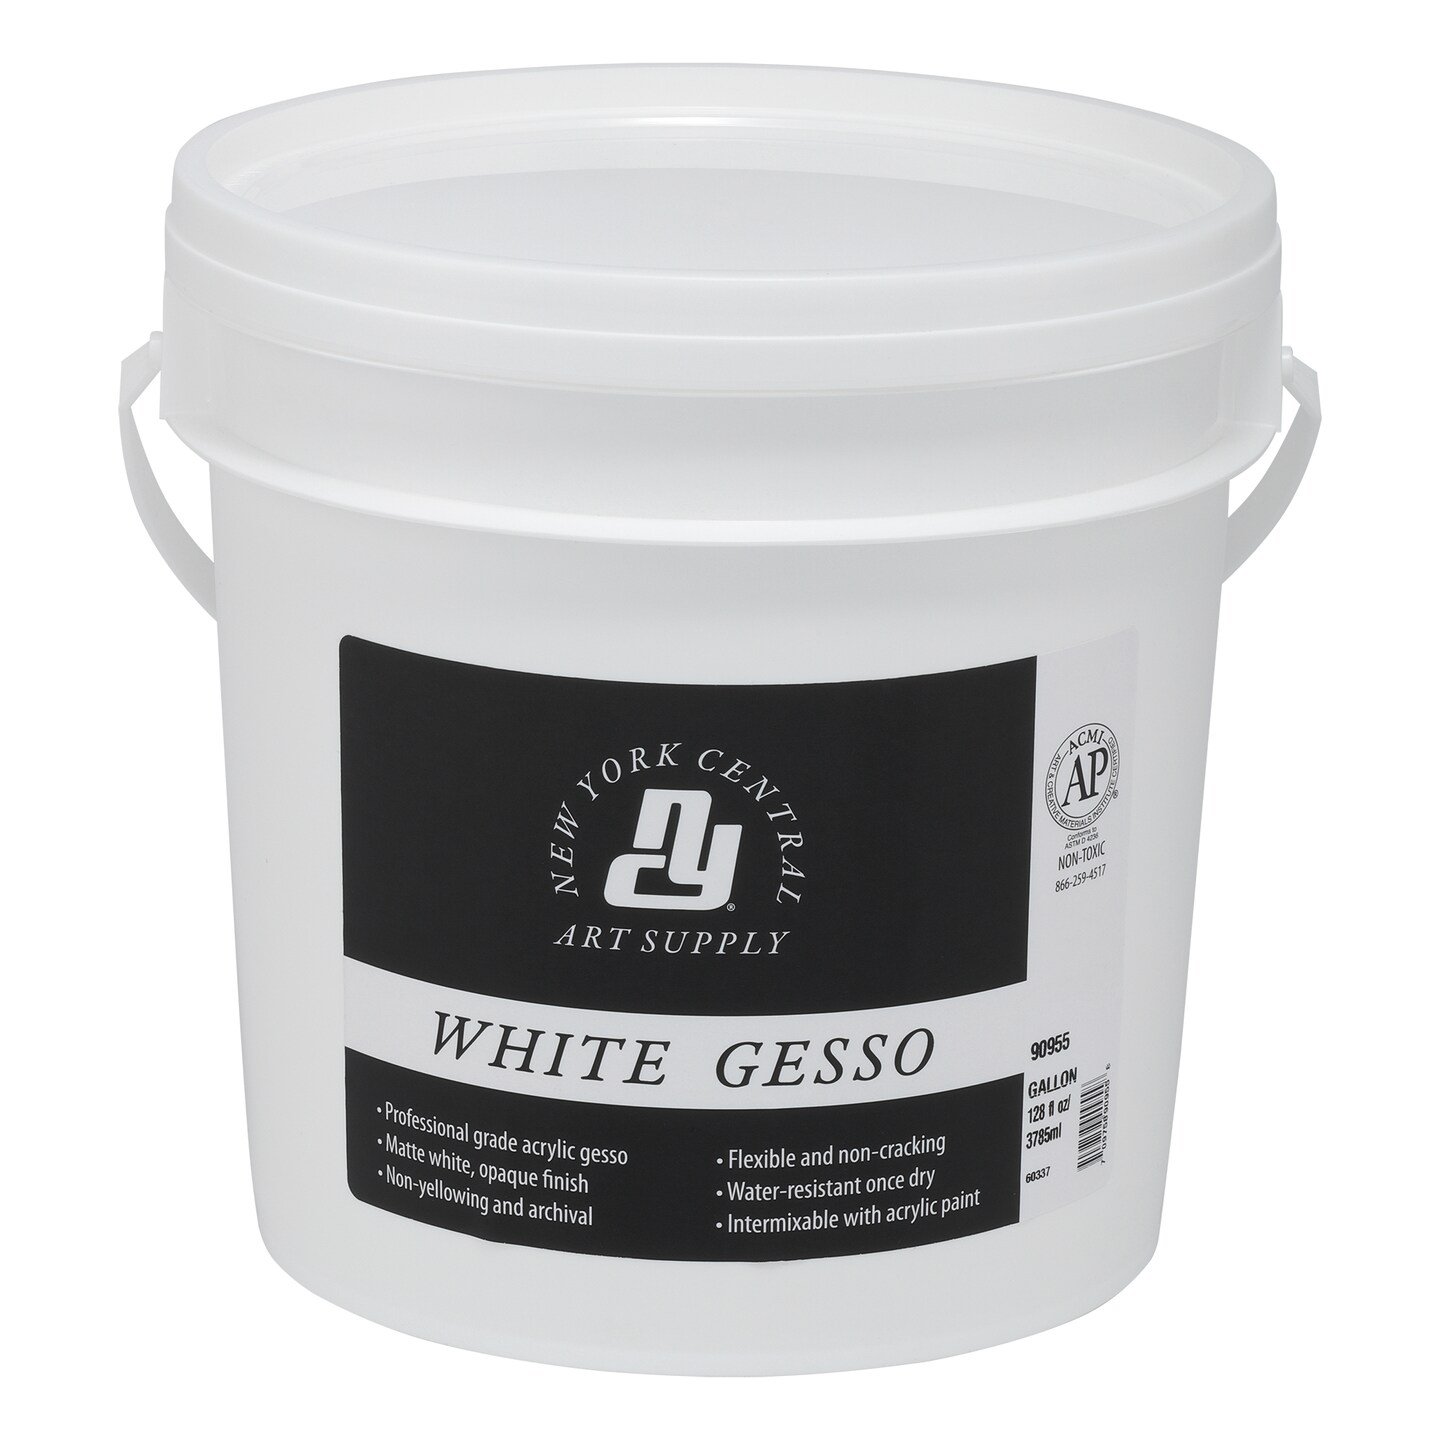 Gesso VS Oil Ground What is Better? 